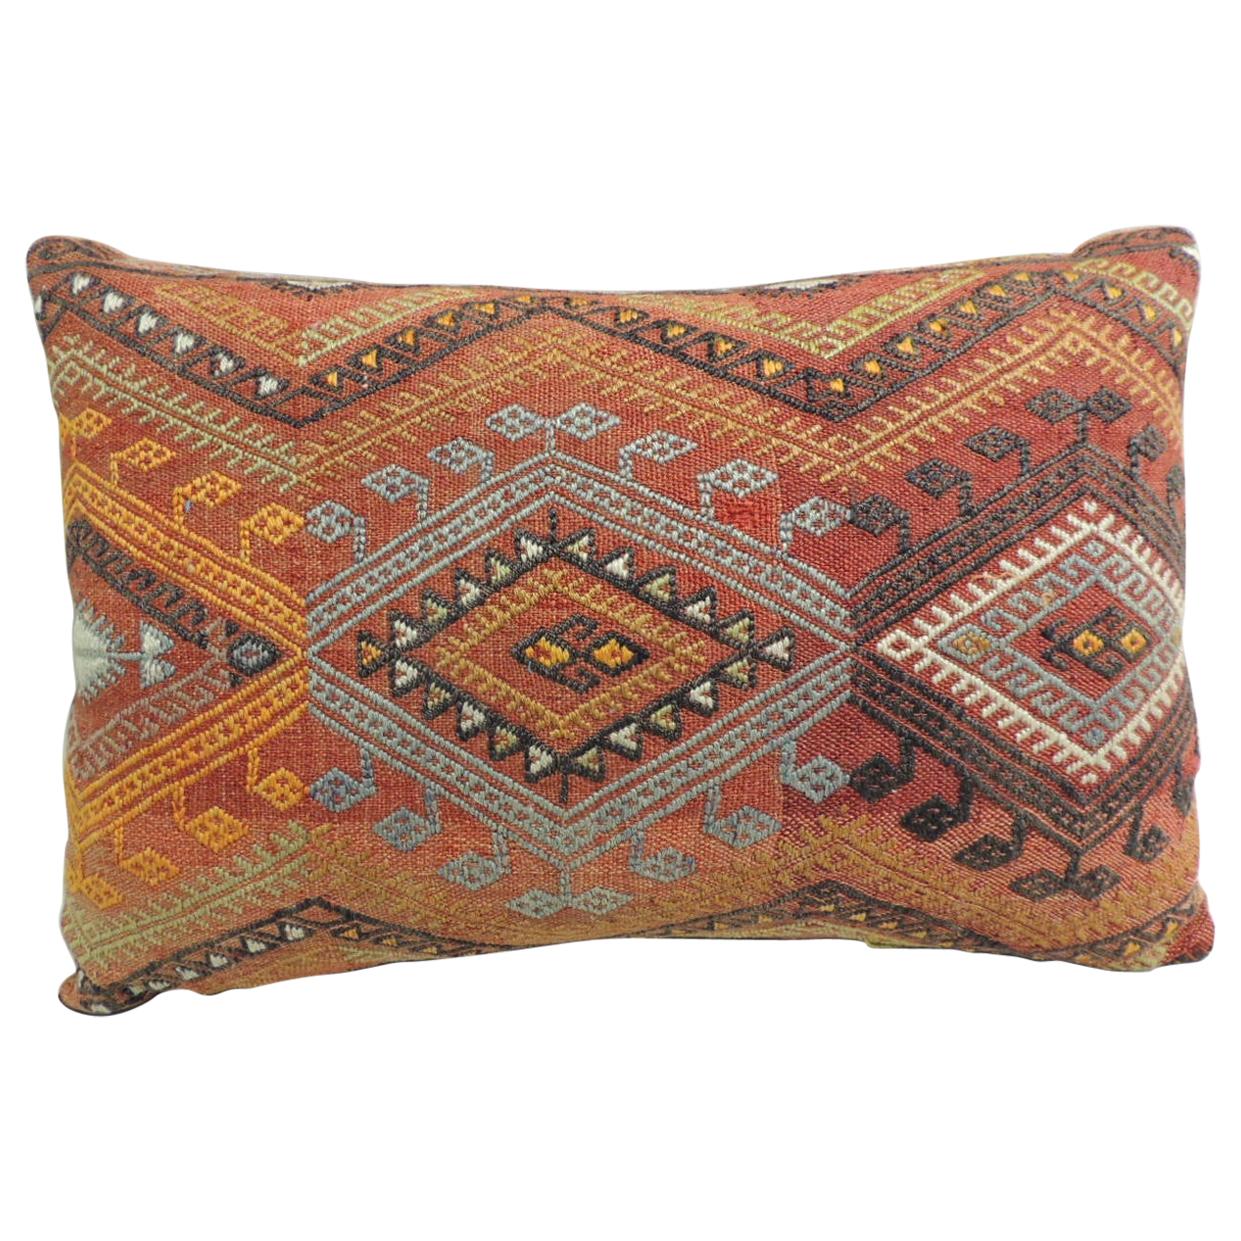 Vintage Moroccan Woven Orange and Red Kilim Decorative Bolster Pillow